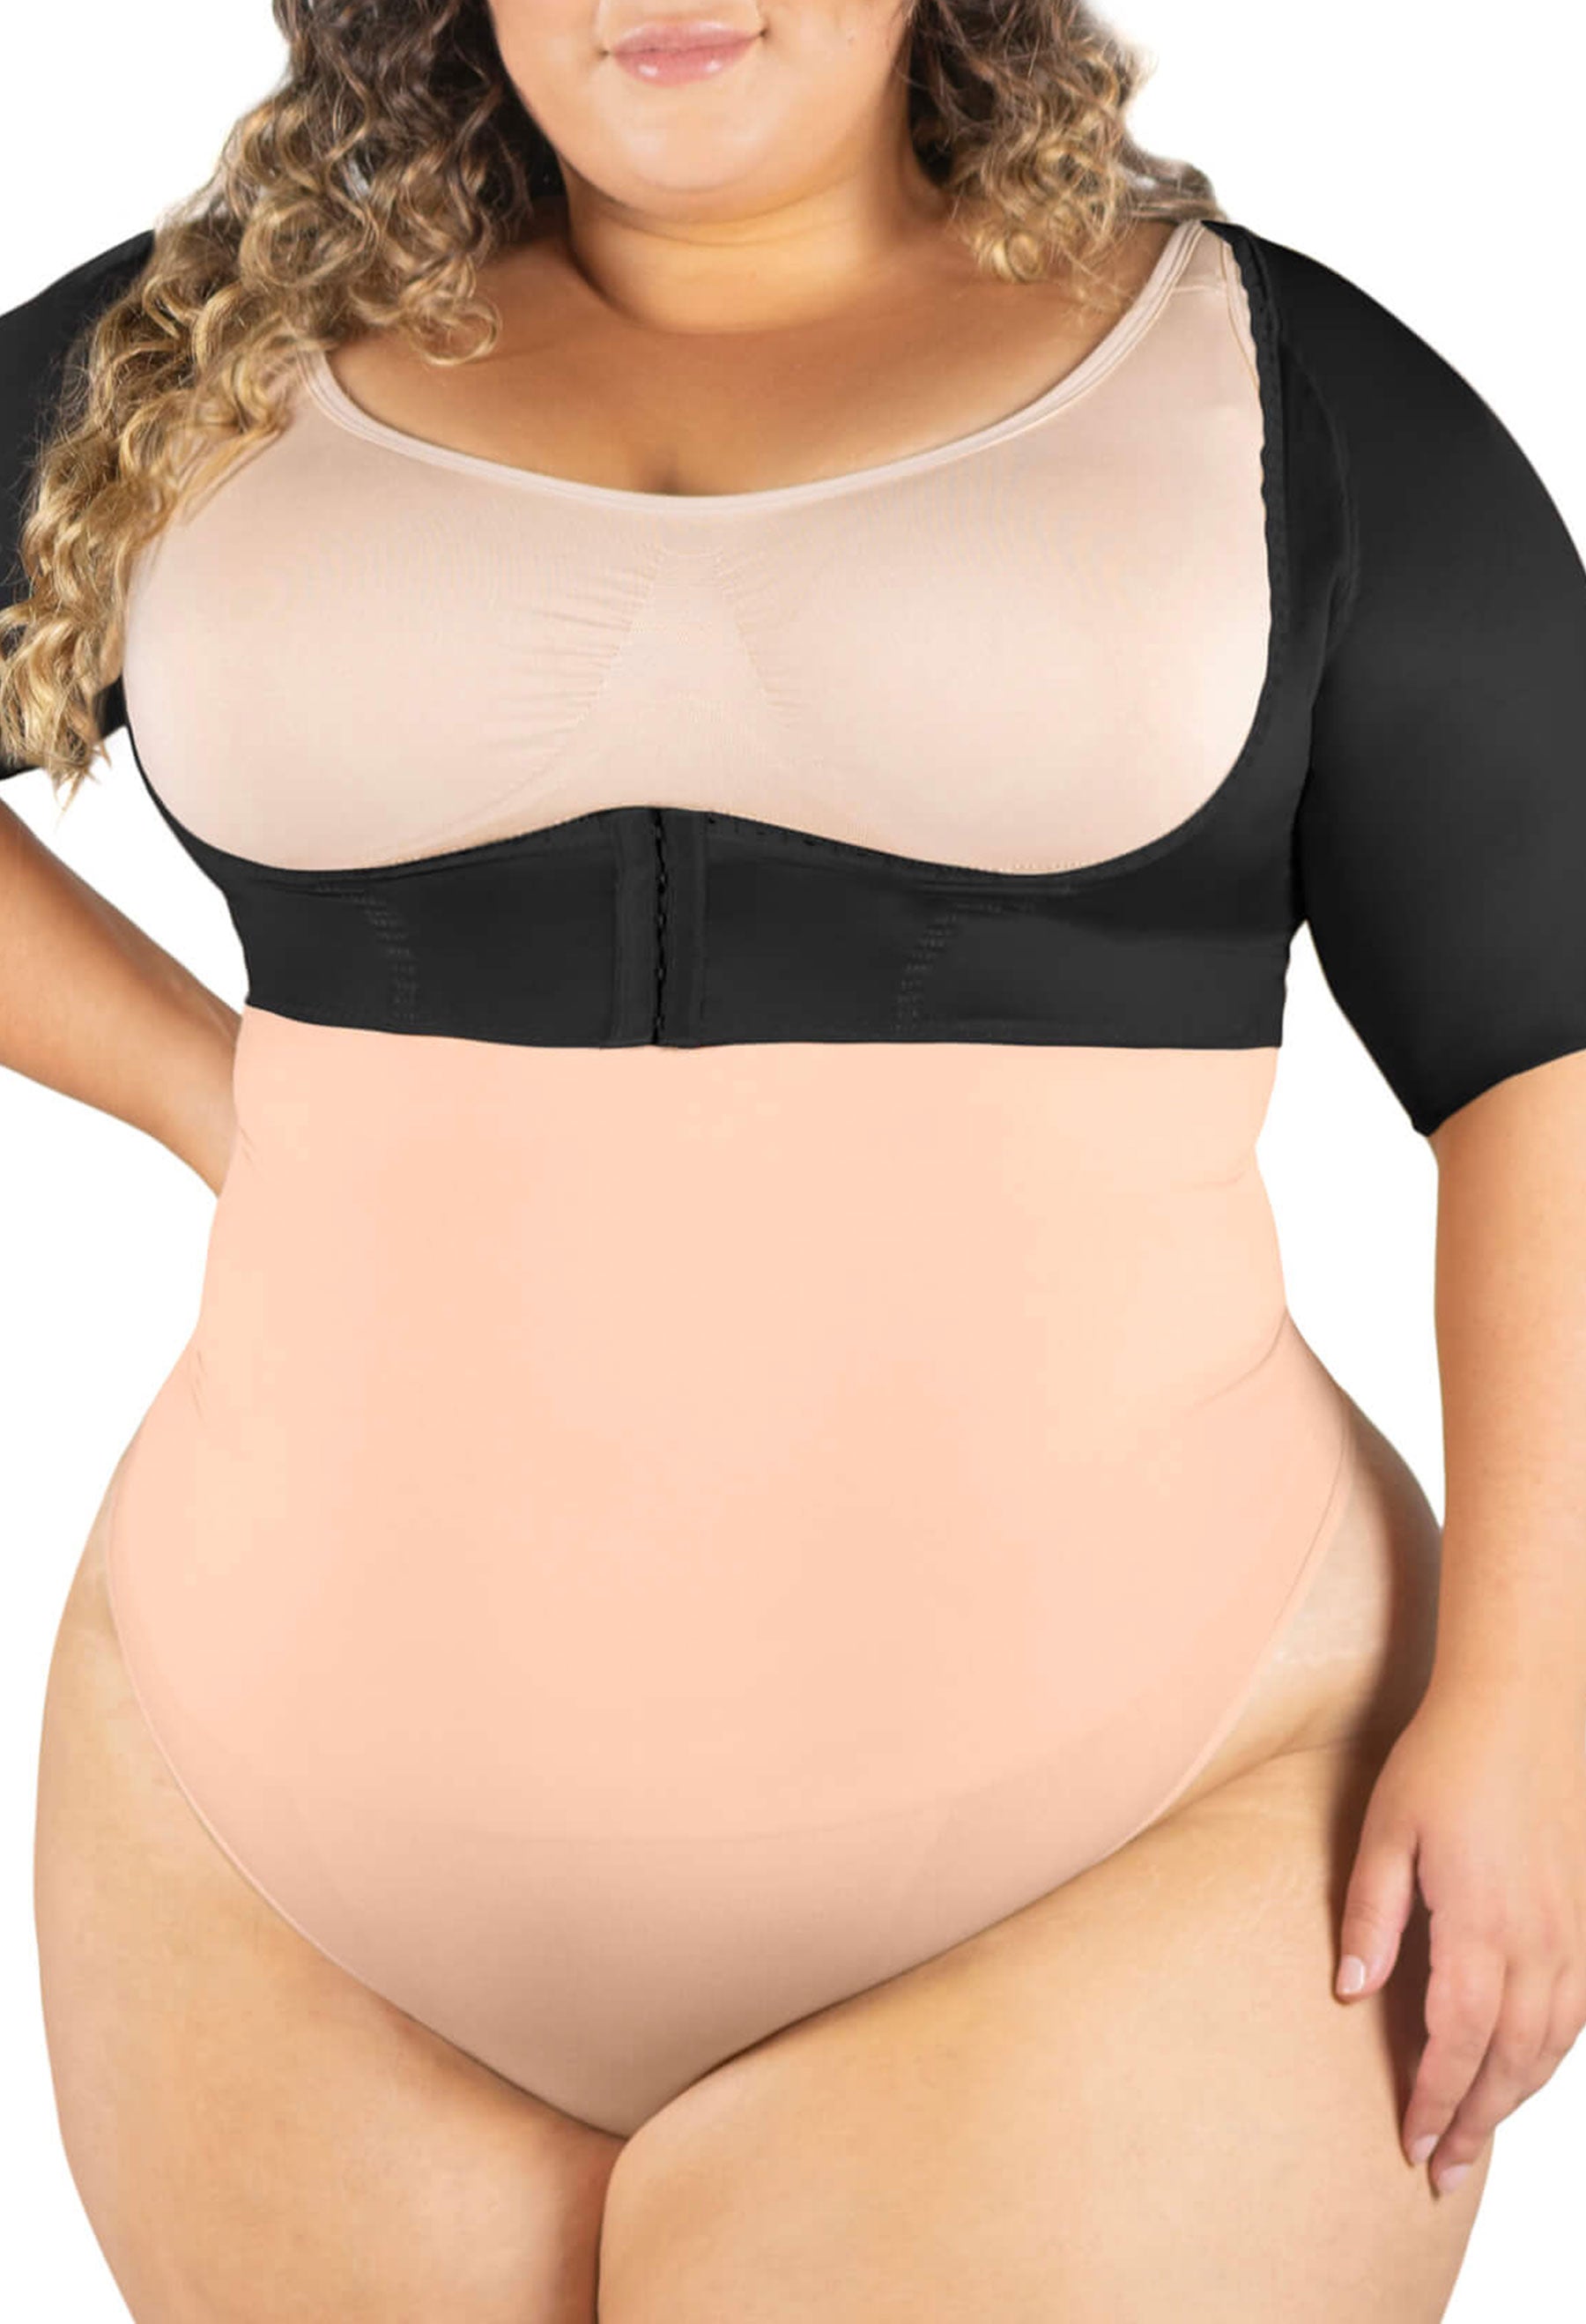 Plus Size Underbust Stay Up Shaping G String B Free Australia